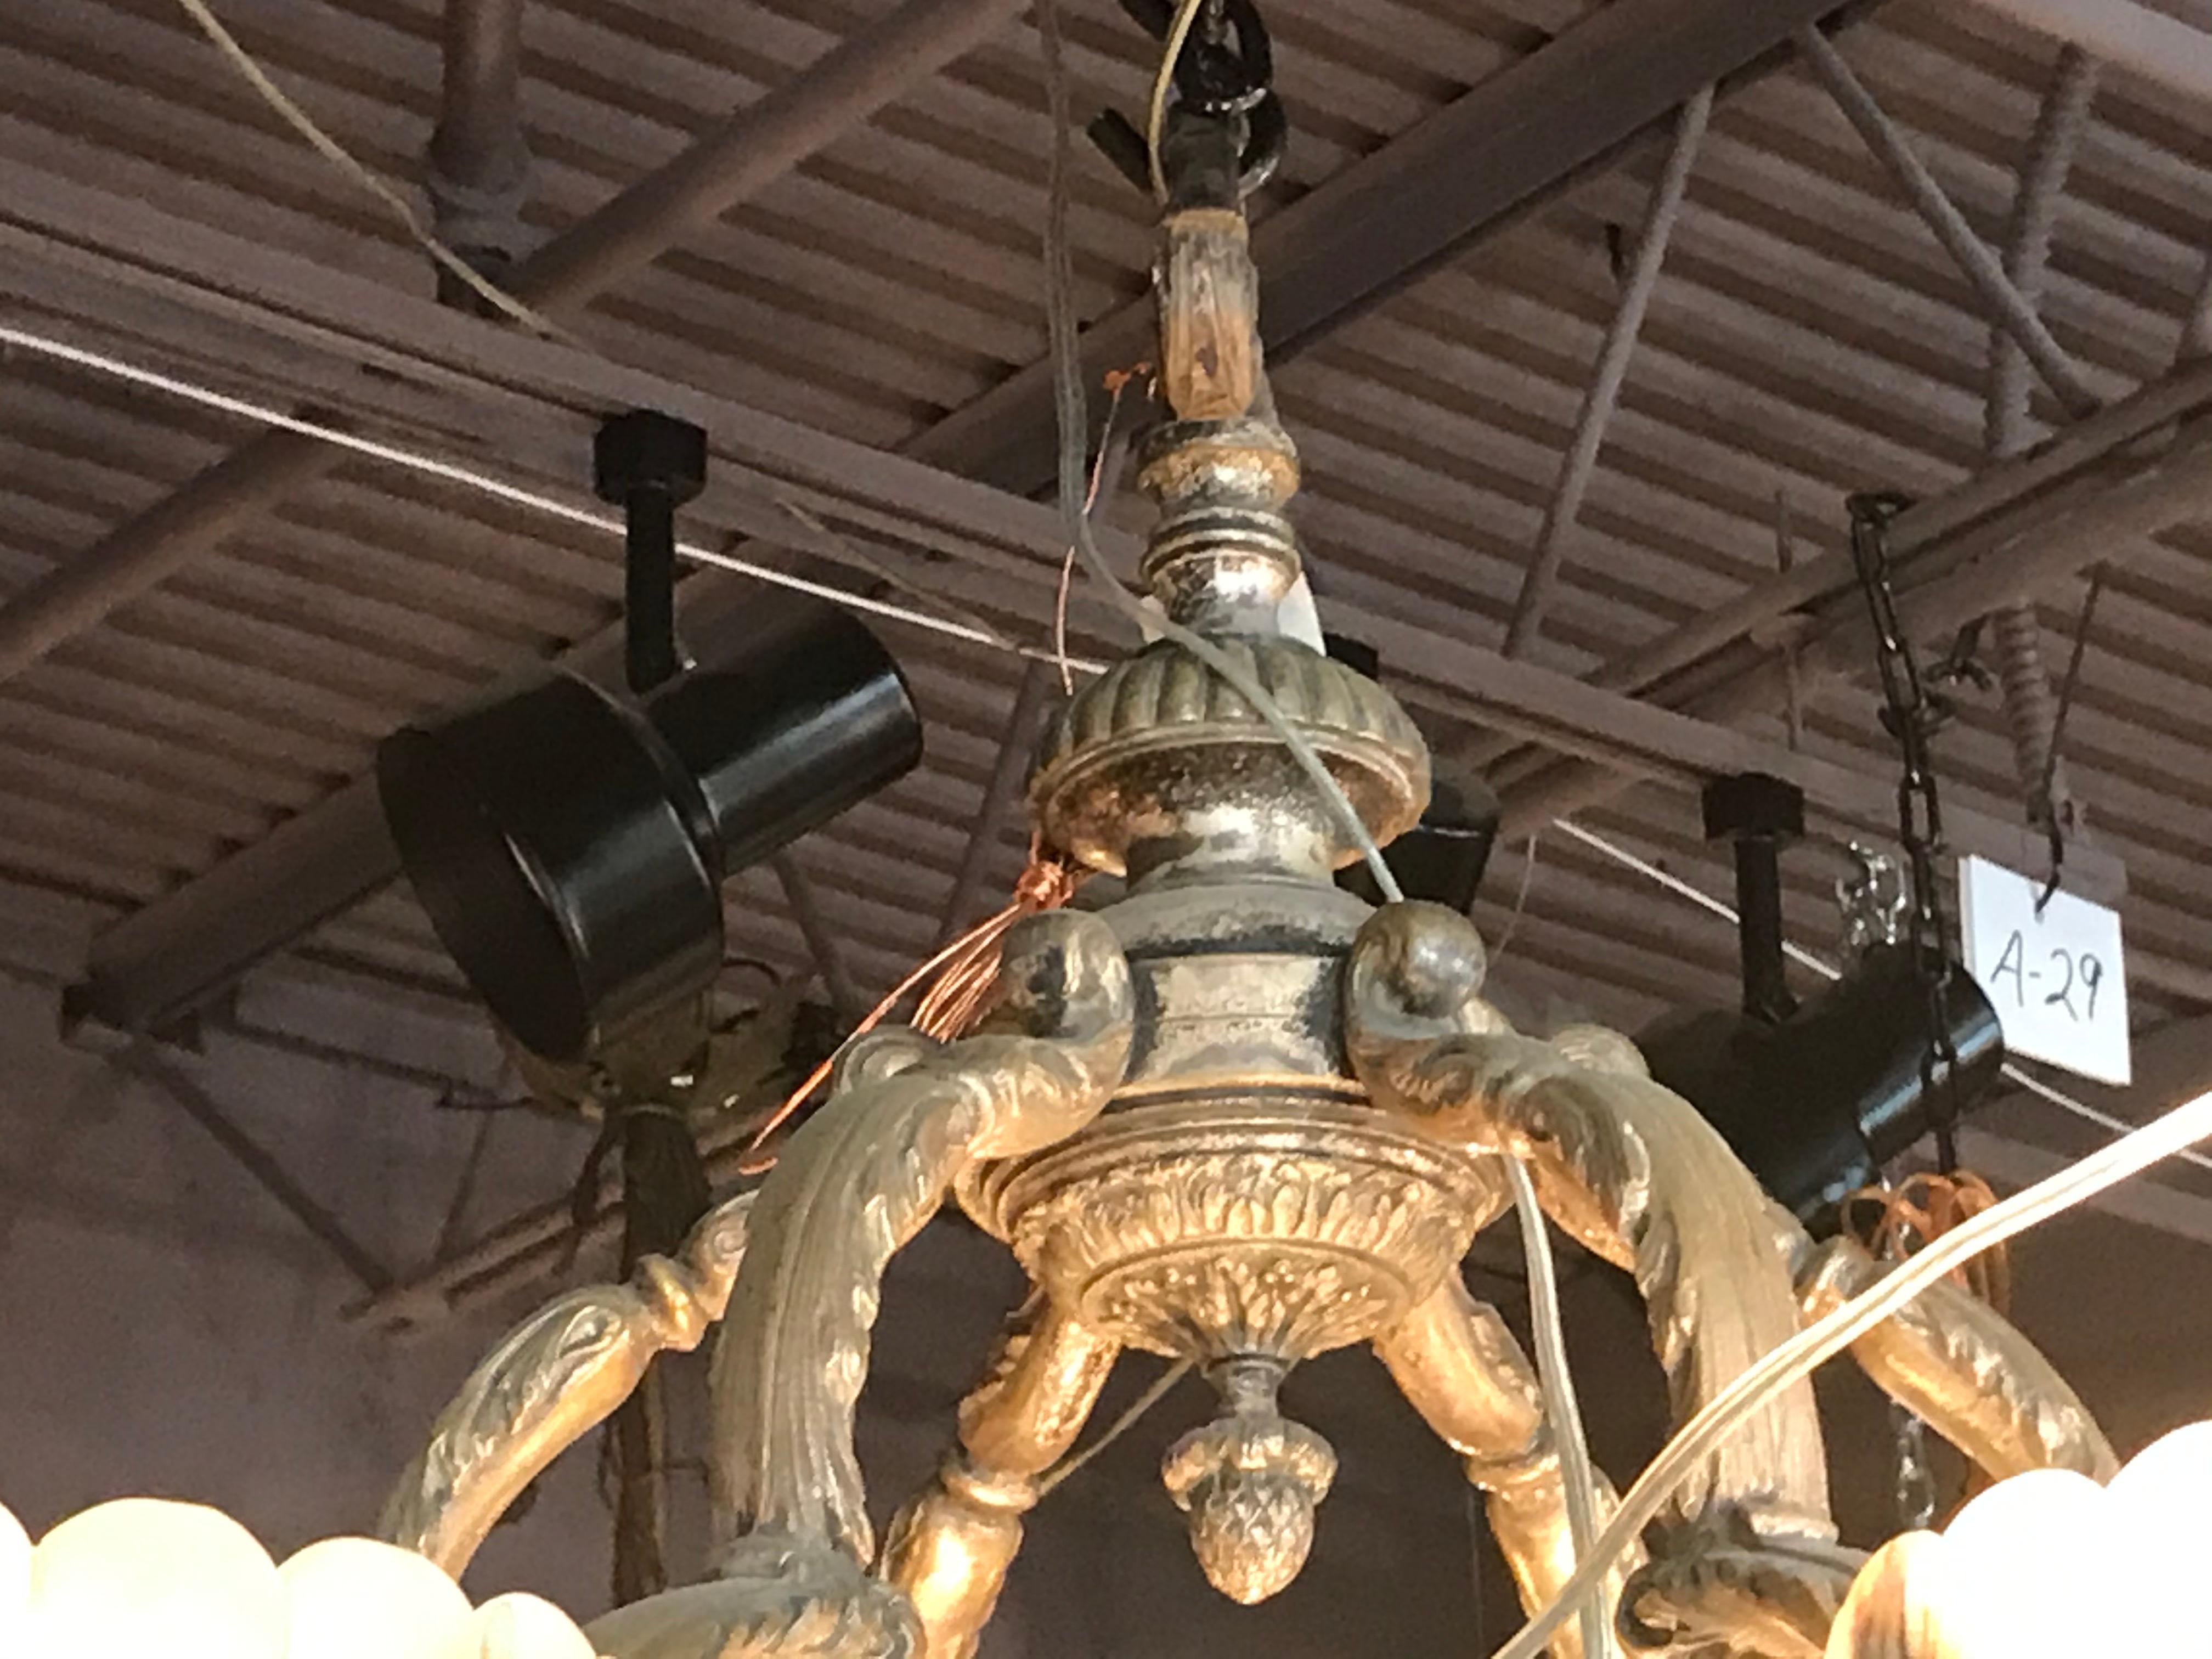 Early 20th Century Very Fine and Decorative Bronze Chandelier with Alabaster Dome and Shades